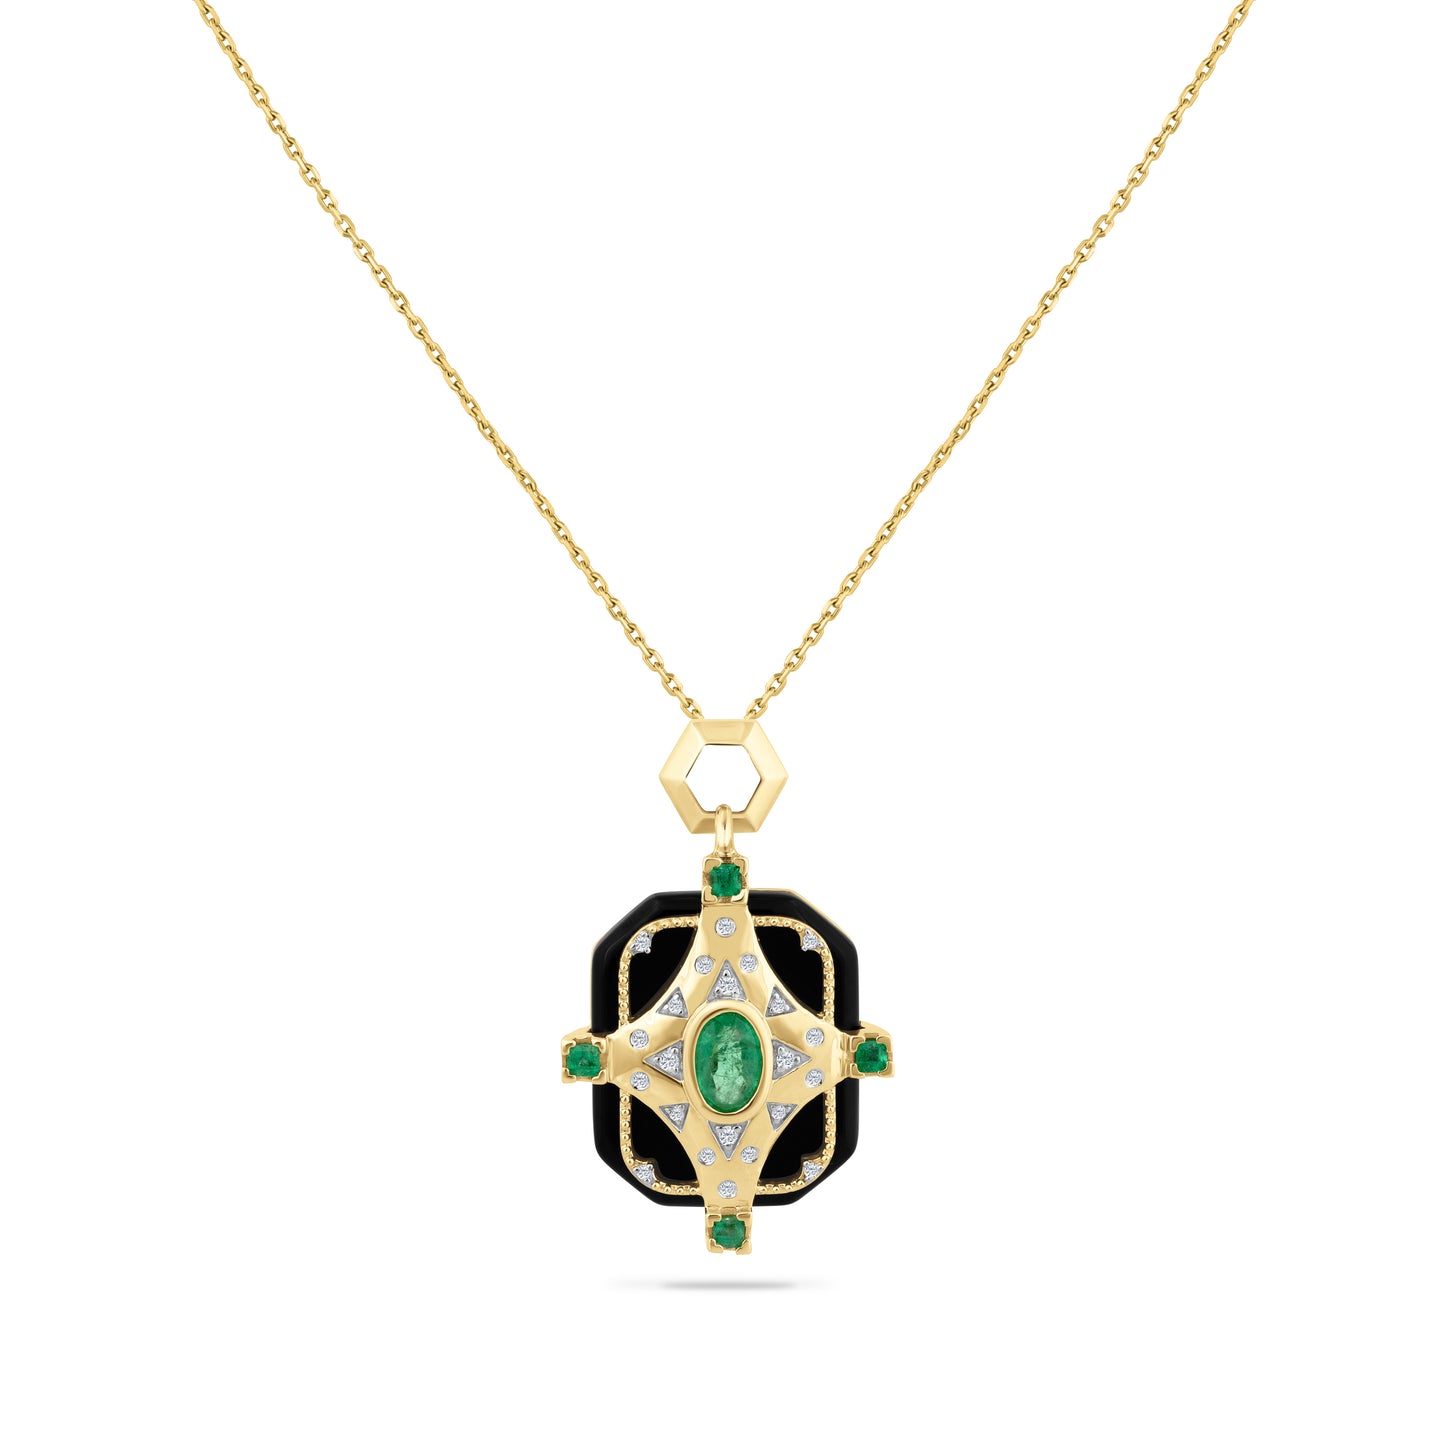 14K PENDANT WITH 22 DIAMONDS 0.09CT,  1 CENTER EMERALD 0.45CT, 4 EMERALDS 0.16CT & BLACK ONYX 1.00CT ON 18 INCHES CHAIN